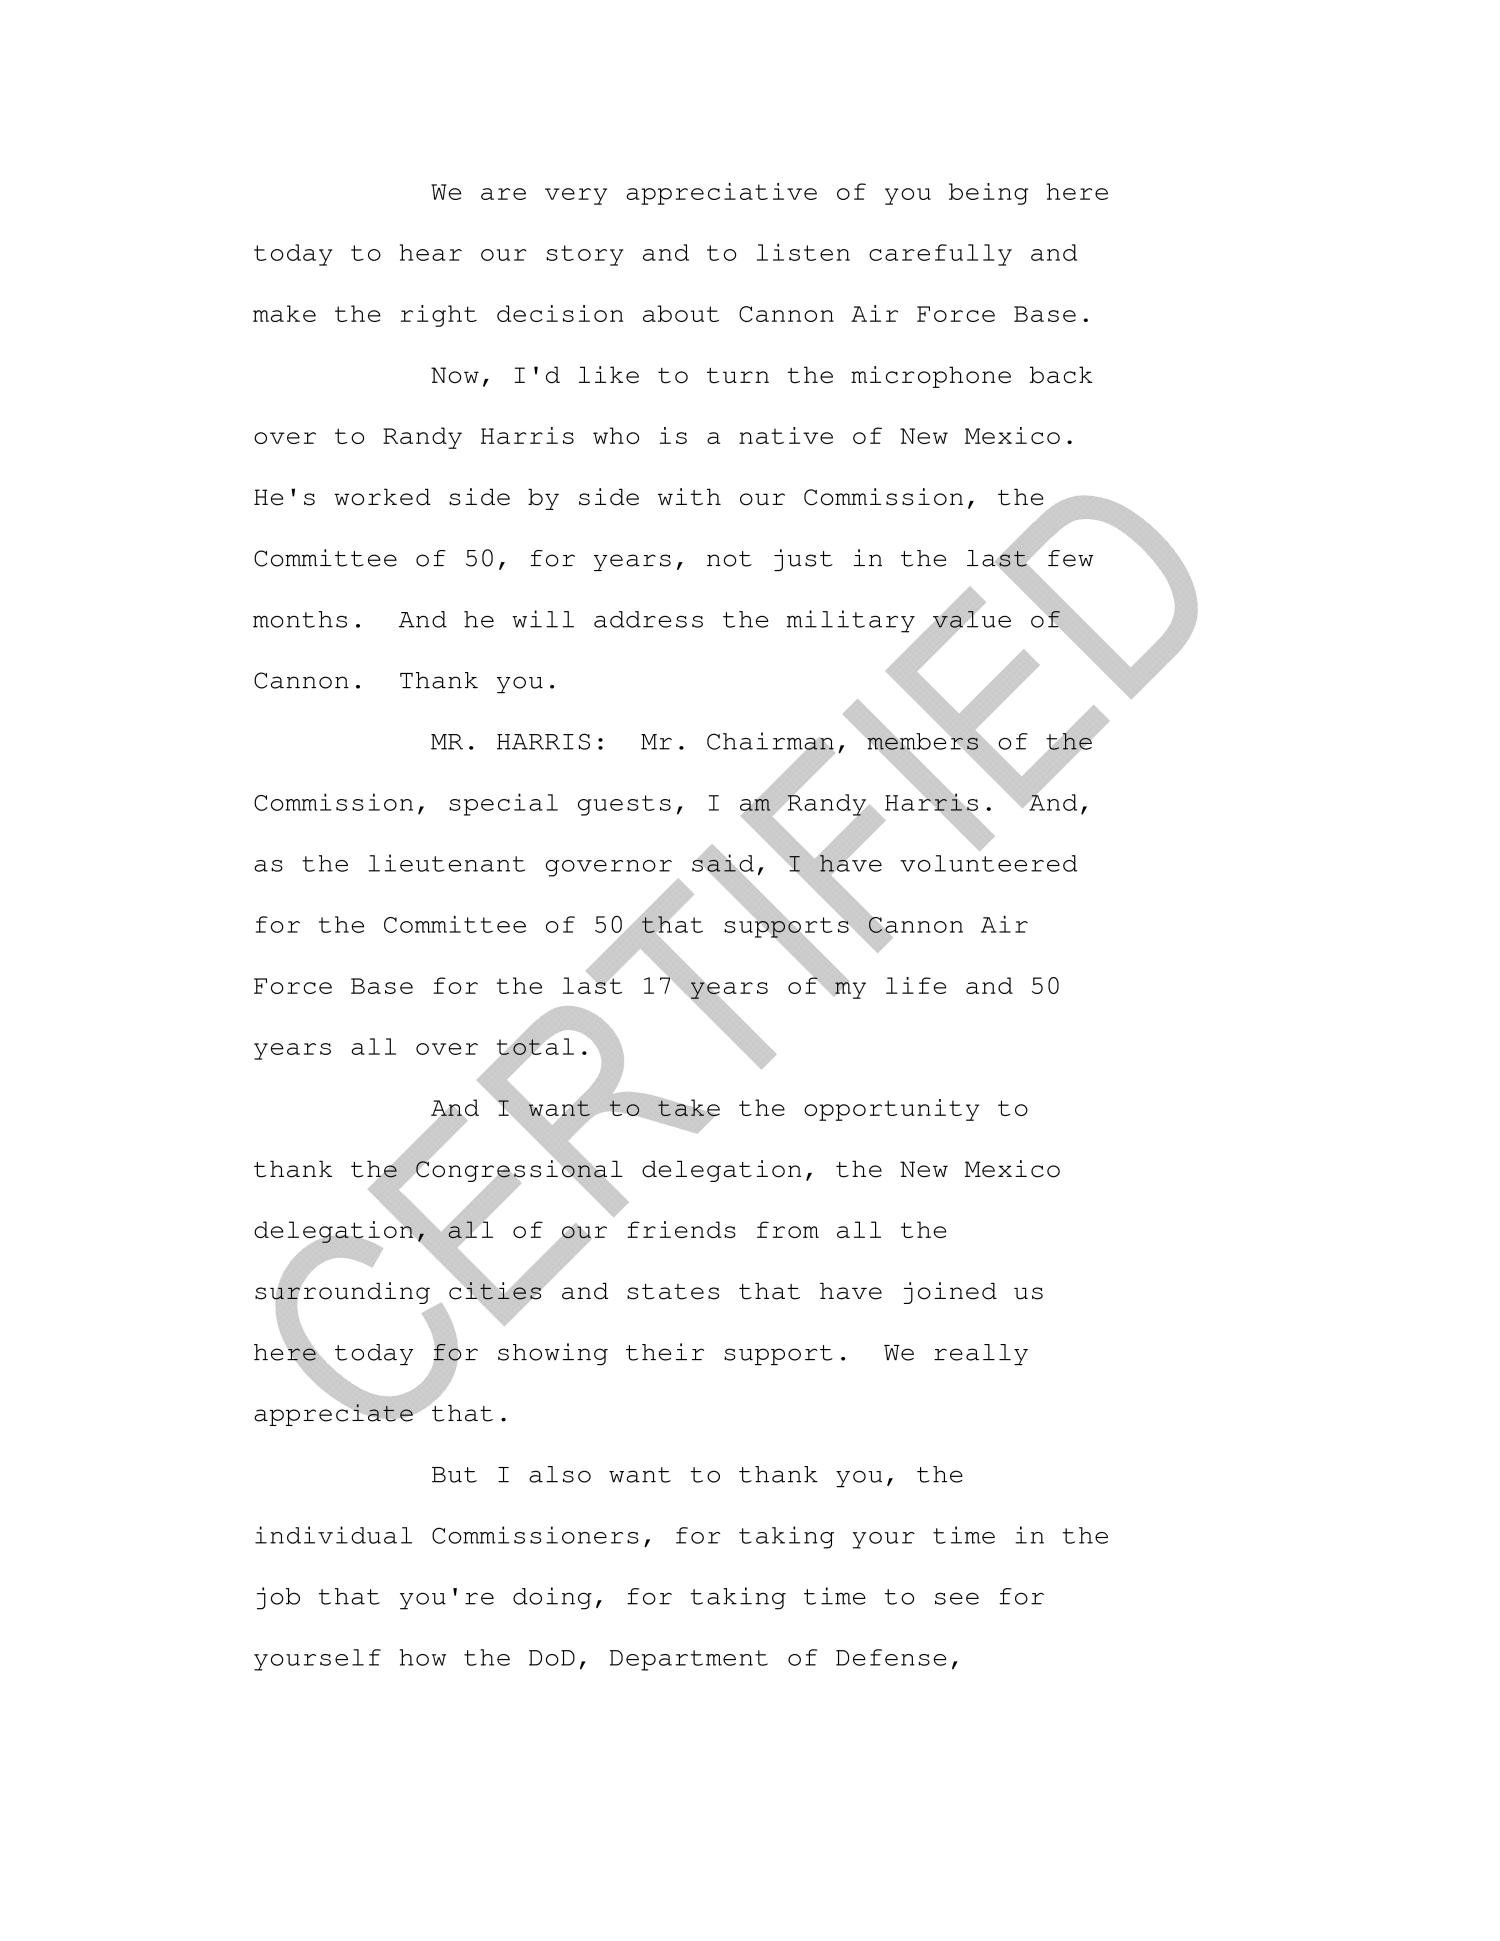 2005 BRAC COMMISSION REGIONAL HEARING FINAL DOCUMENT FRIDAY, JUNE 24, 2005.  CLOVIS, NEW MEXICO.
                                                
                                                    [Sequence #]: 20 of 144
                                                